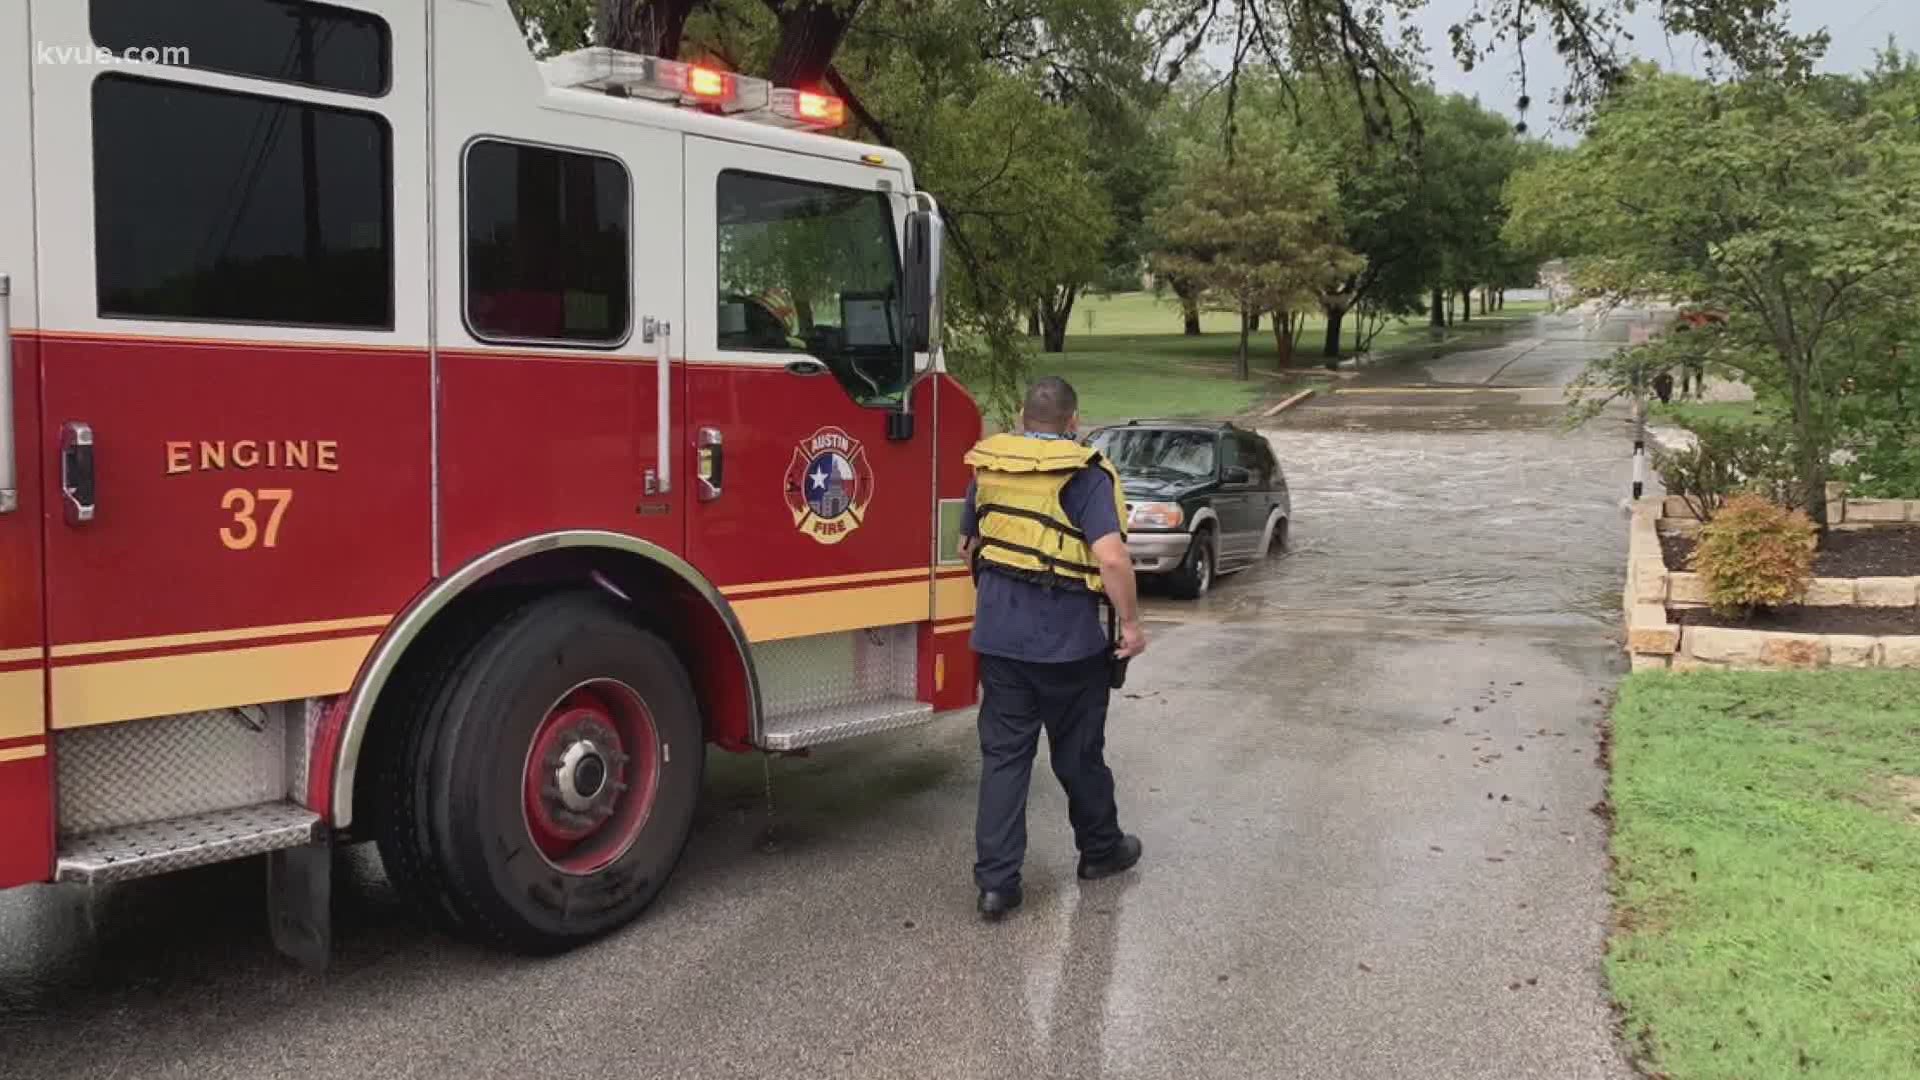 Heavy rains flooded Central Texas roads on Wednesday, with at least one rescue from a low water crossing. Motorists are reminded to "turn around, don't drown."